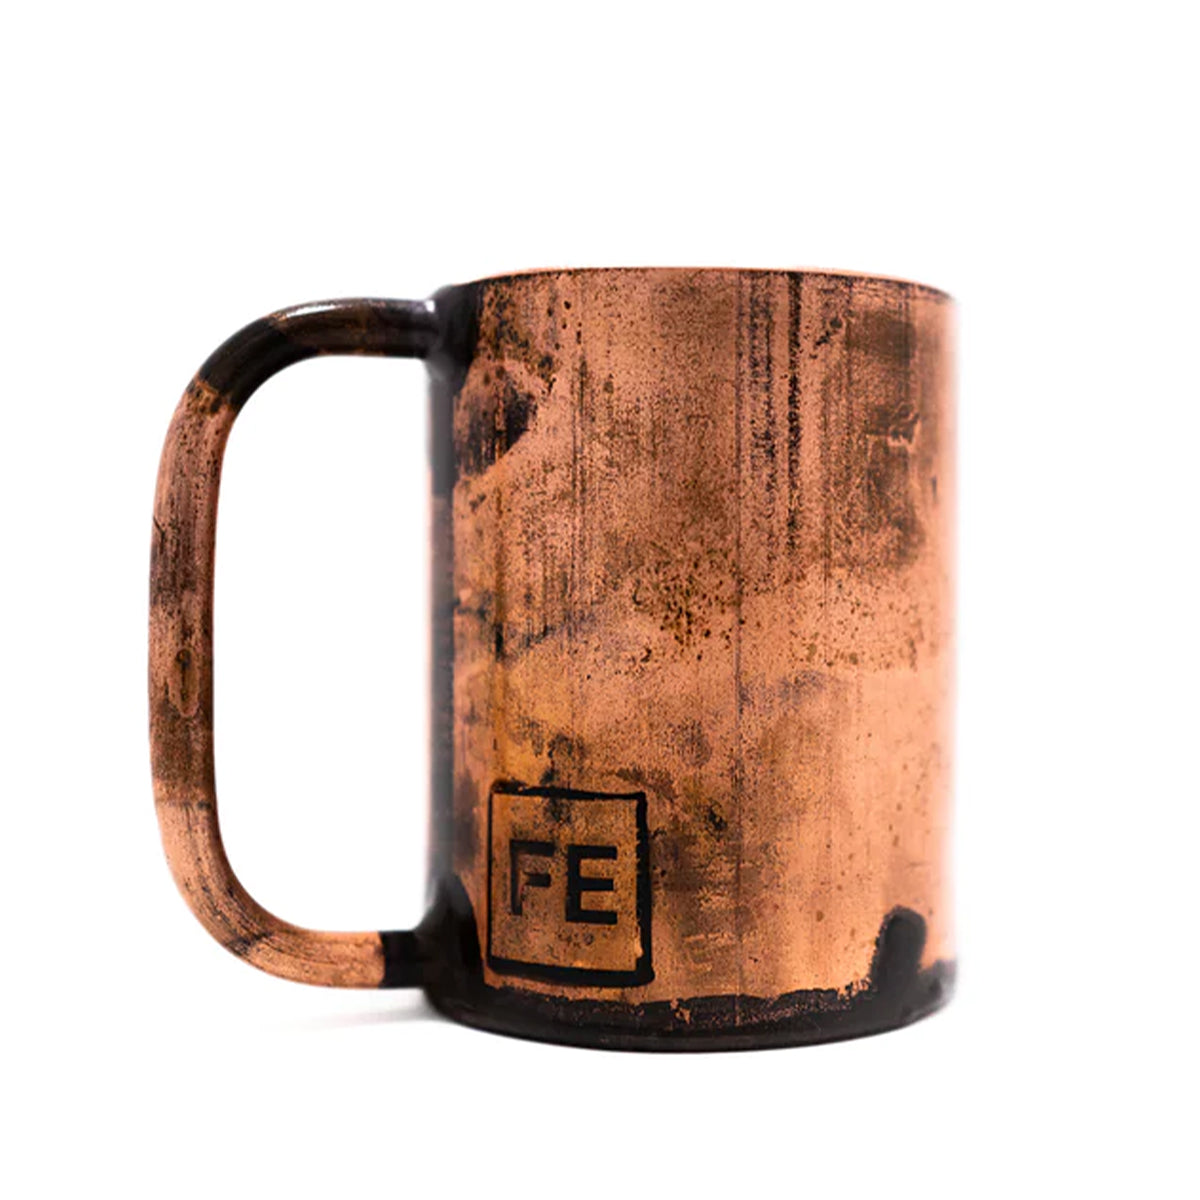 IN-STOCK Fellow Mugs Copper Base Double Wall for Heat! Shop Link In Bio by  @passionhousecoffee